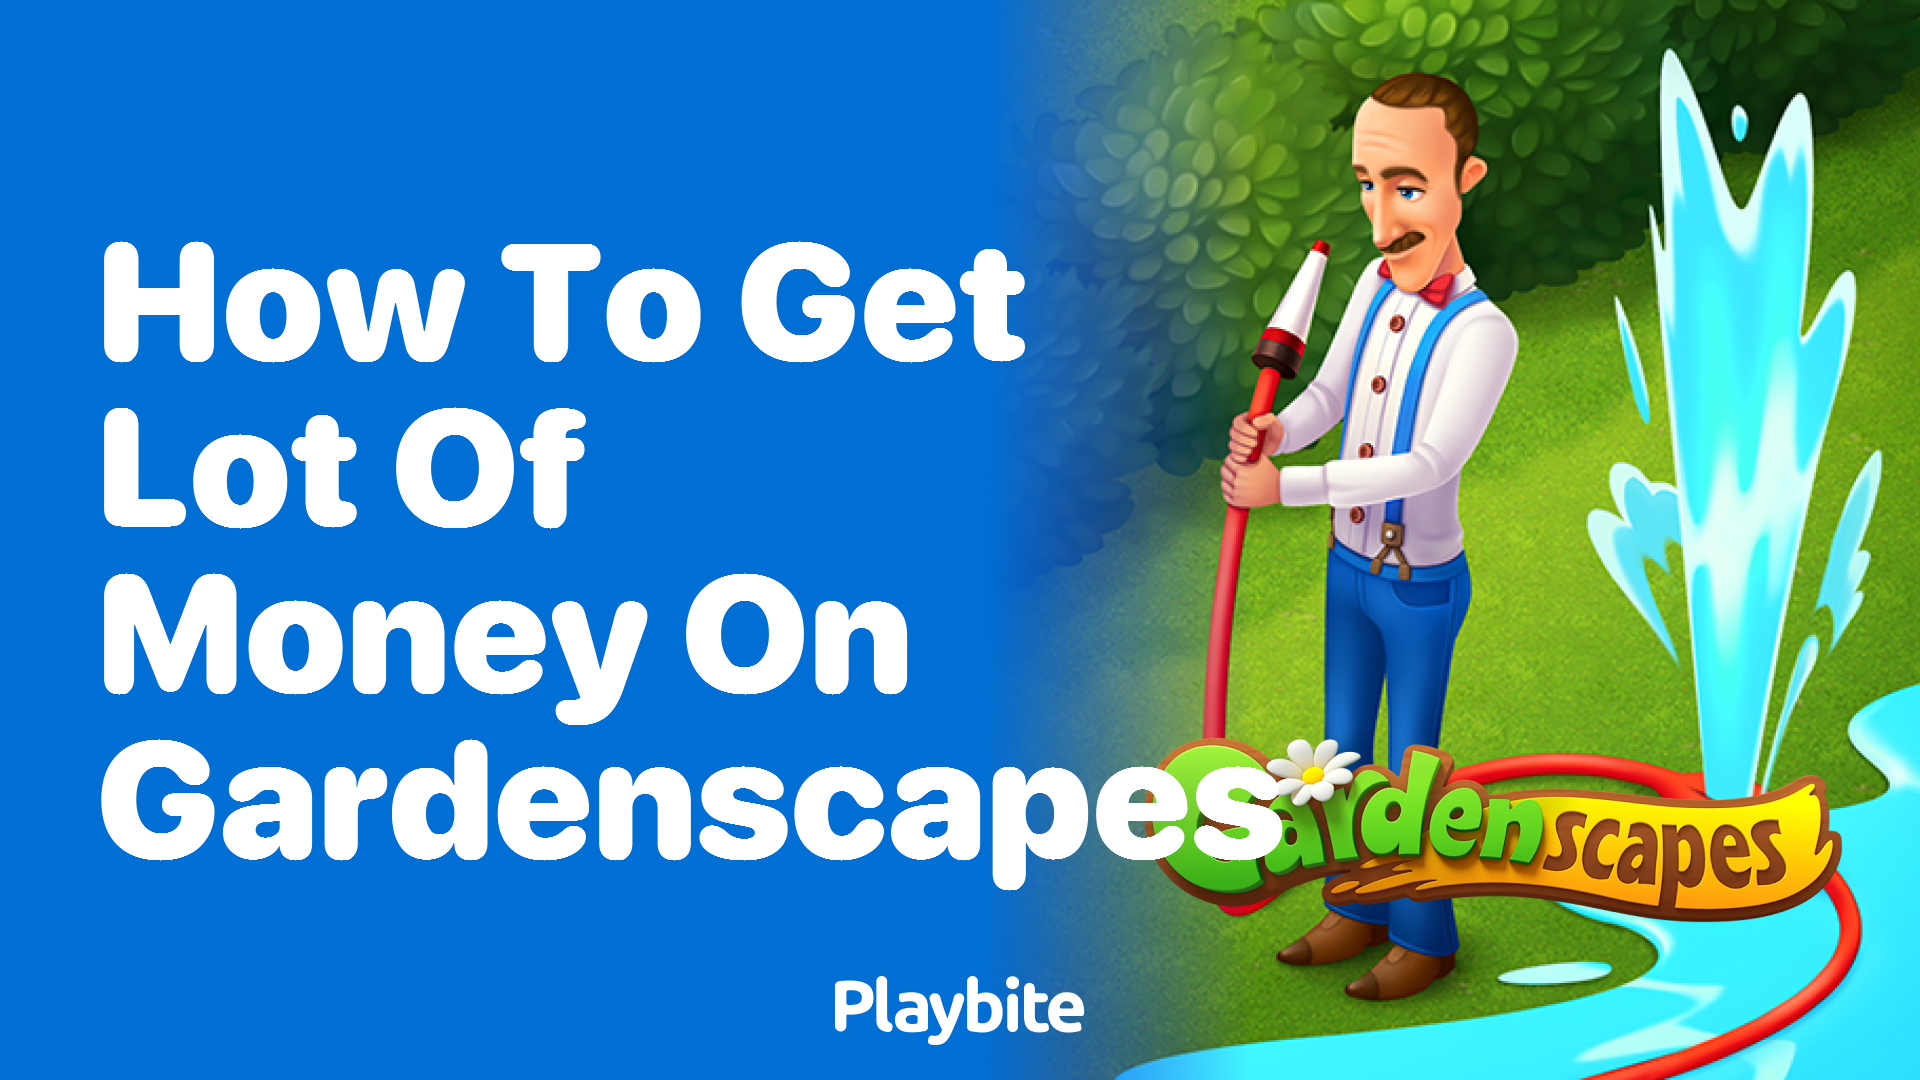 How to Get a Lot of Money on Gardenscapes